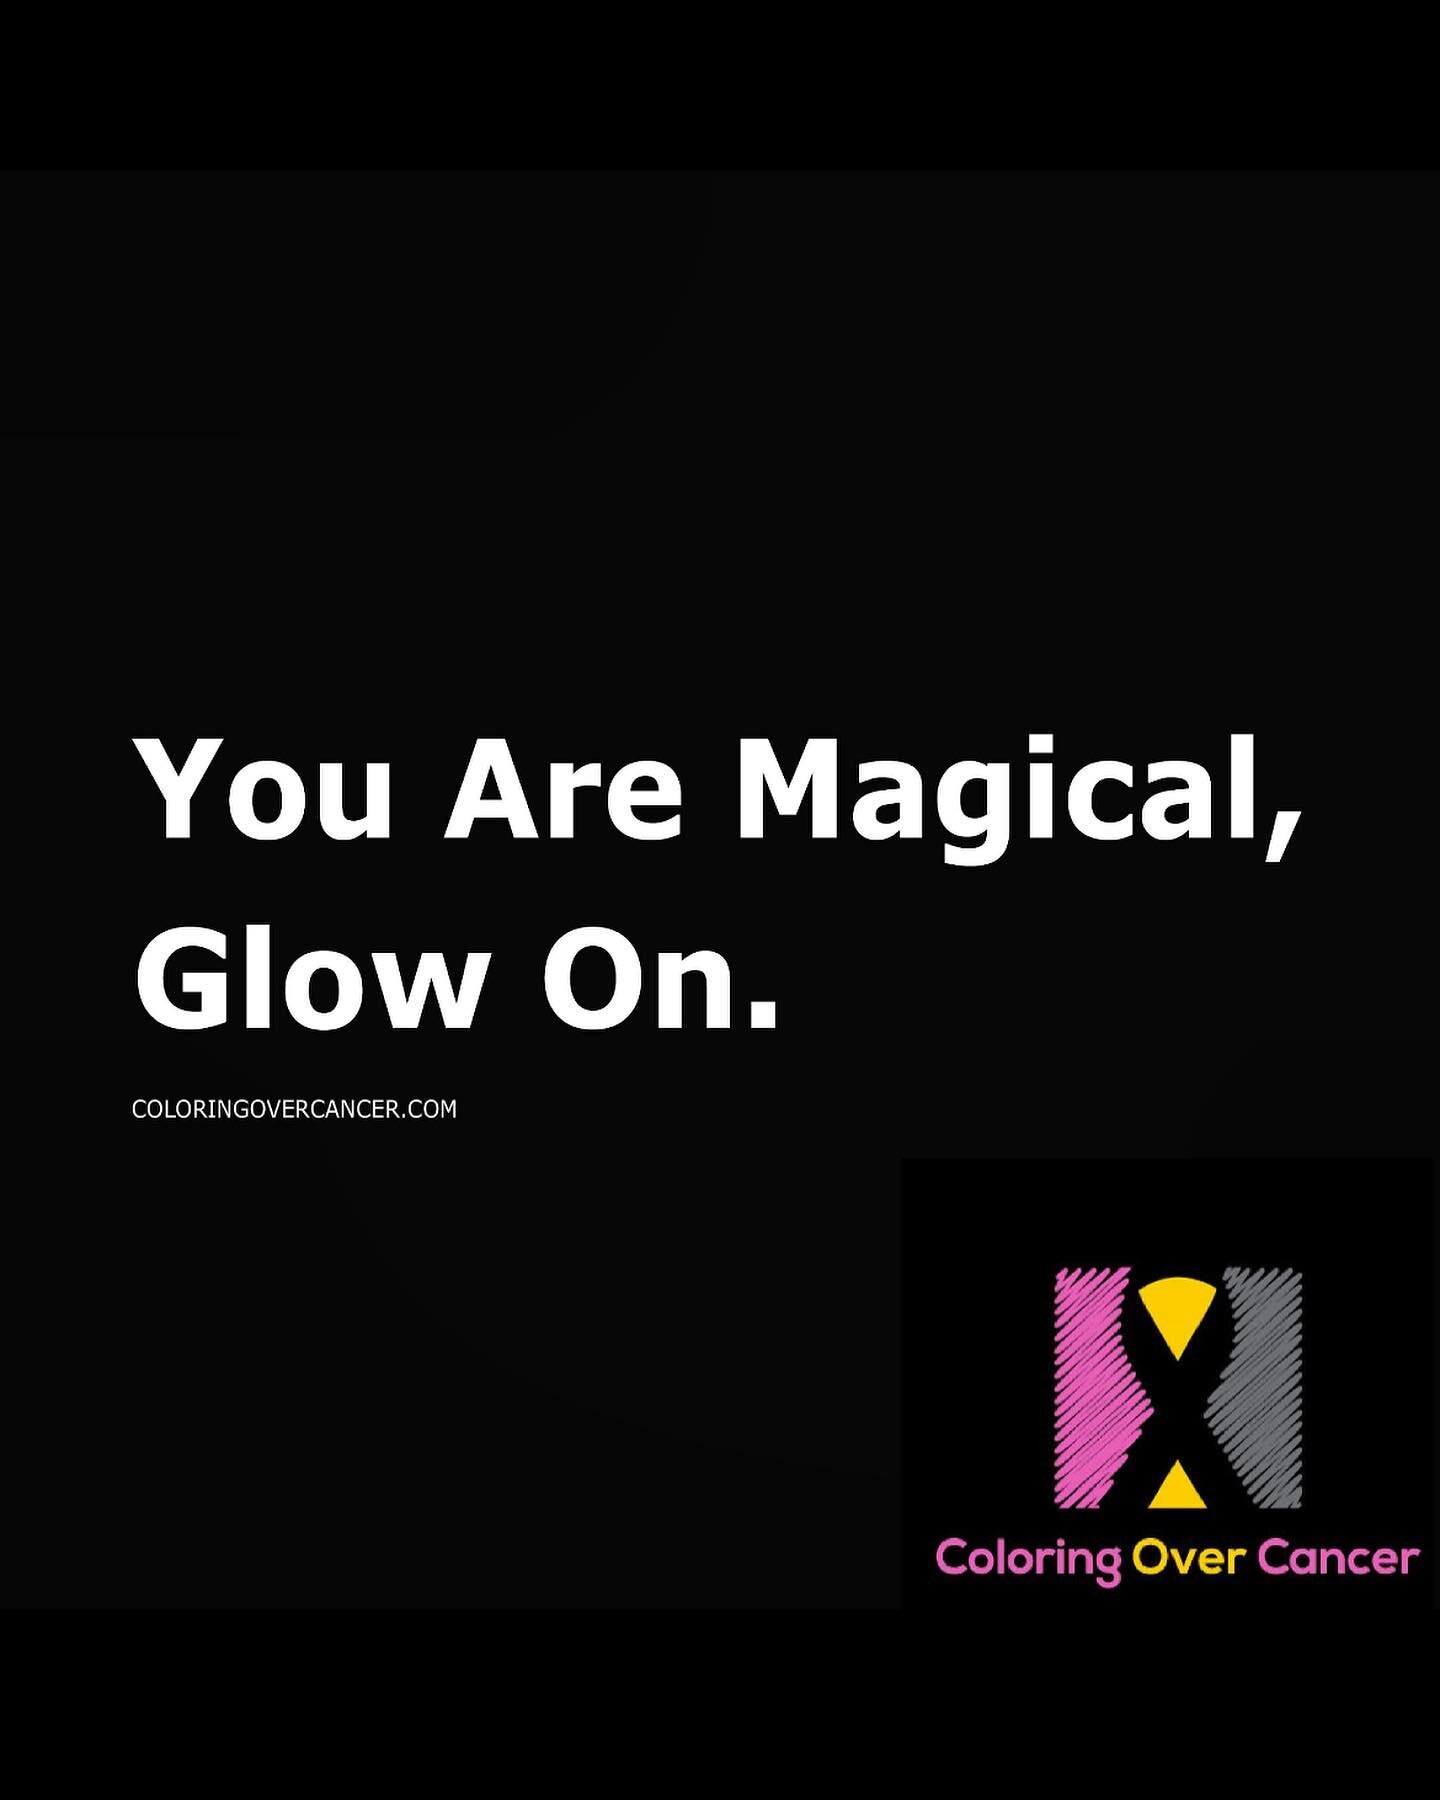 I&rsquo;m case nobody told you today&hellip;. #glow #on #shine #bright #yougotthis 💫